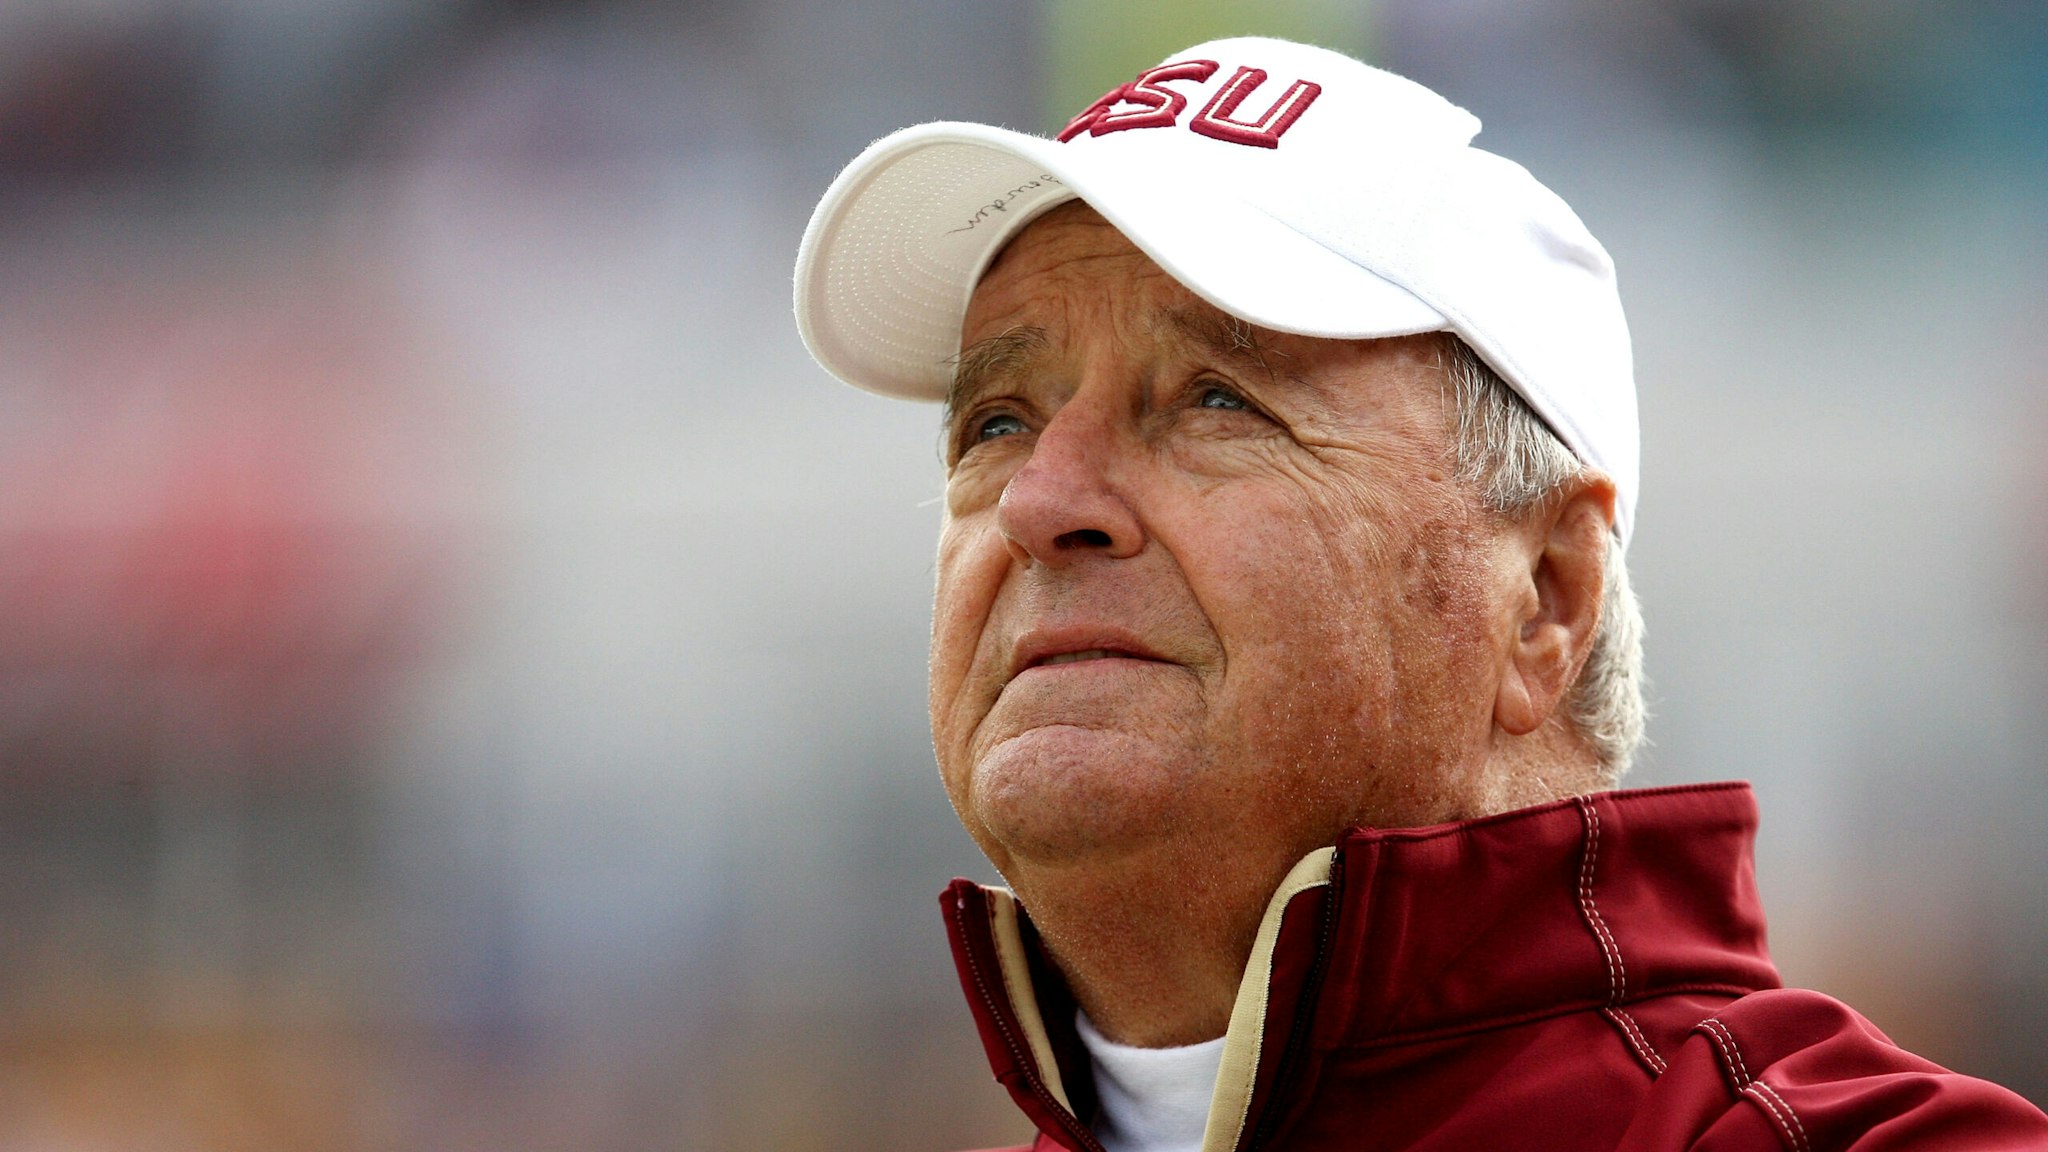 JACKSONVILLE, FL - JANUARY 01: Head coach Bobby Bowden of the Florida State Seminoles watches his team take on the West Virginia Mountaineers during the Konica Minolta Gator Bowl on January 1, 2010 in Jacksonville, Florida.